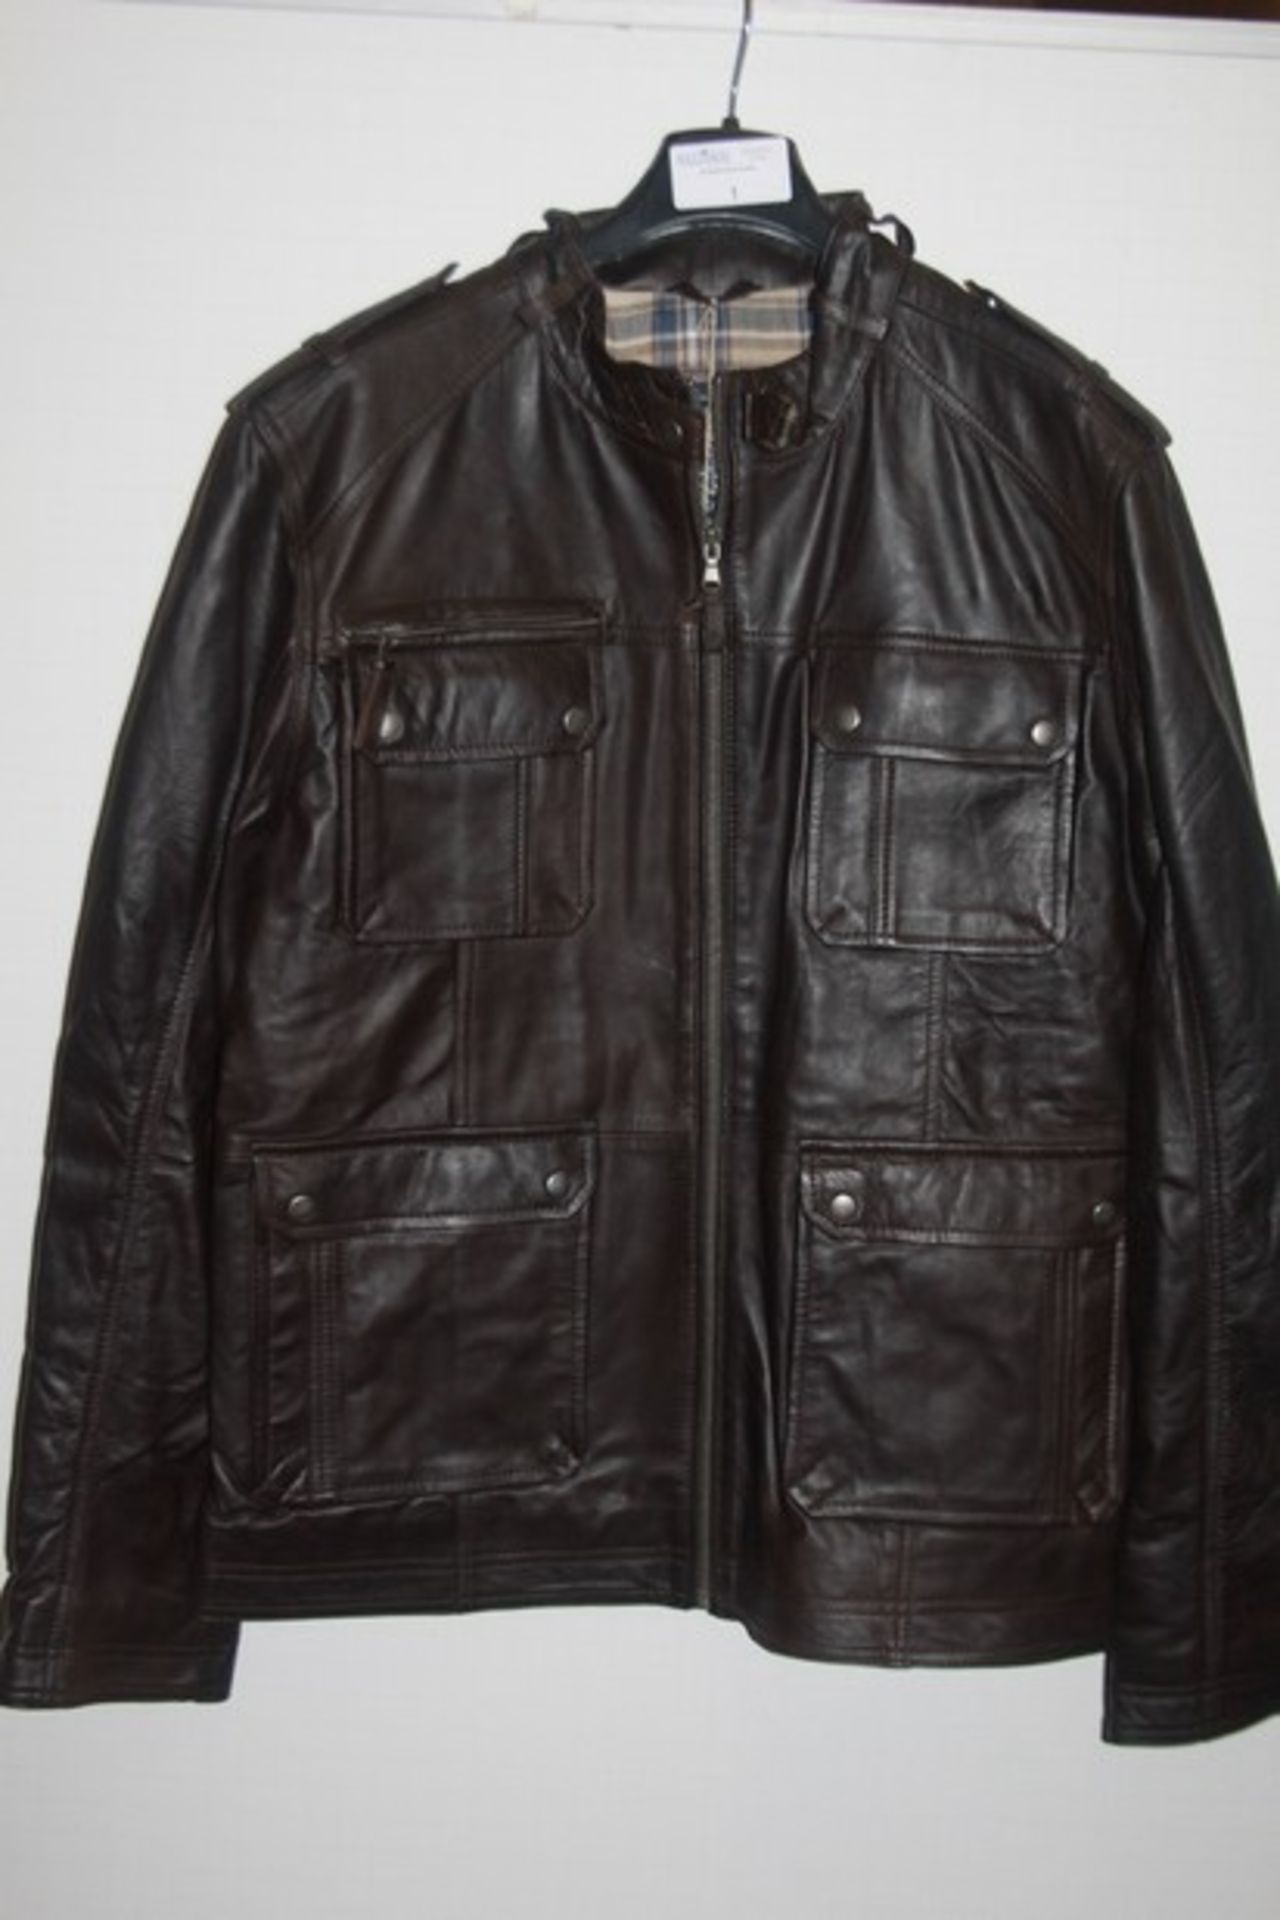 BRAND NEW GENTS PAUL COSTELLEO LIVING  LEATHER JACKET SIZE XL RRP £212.00